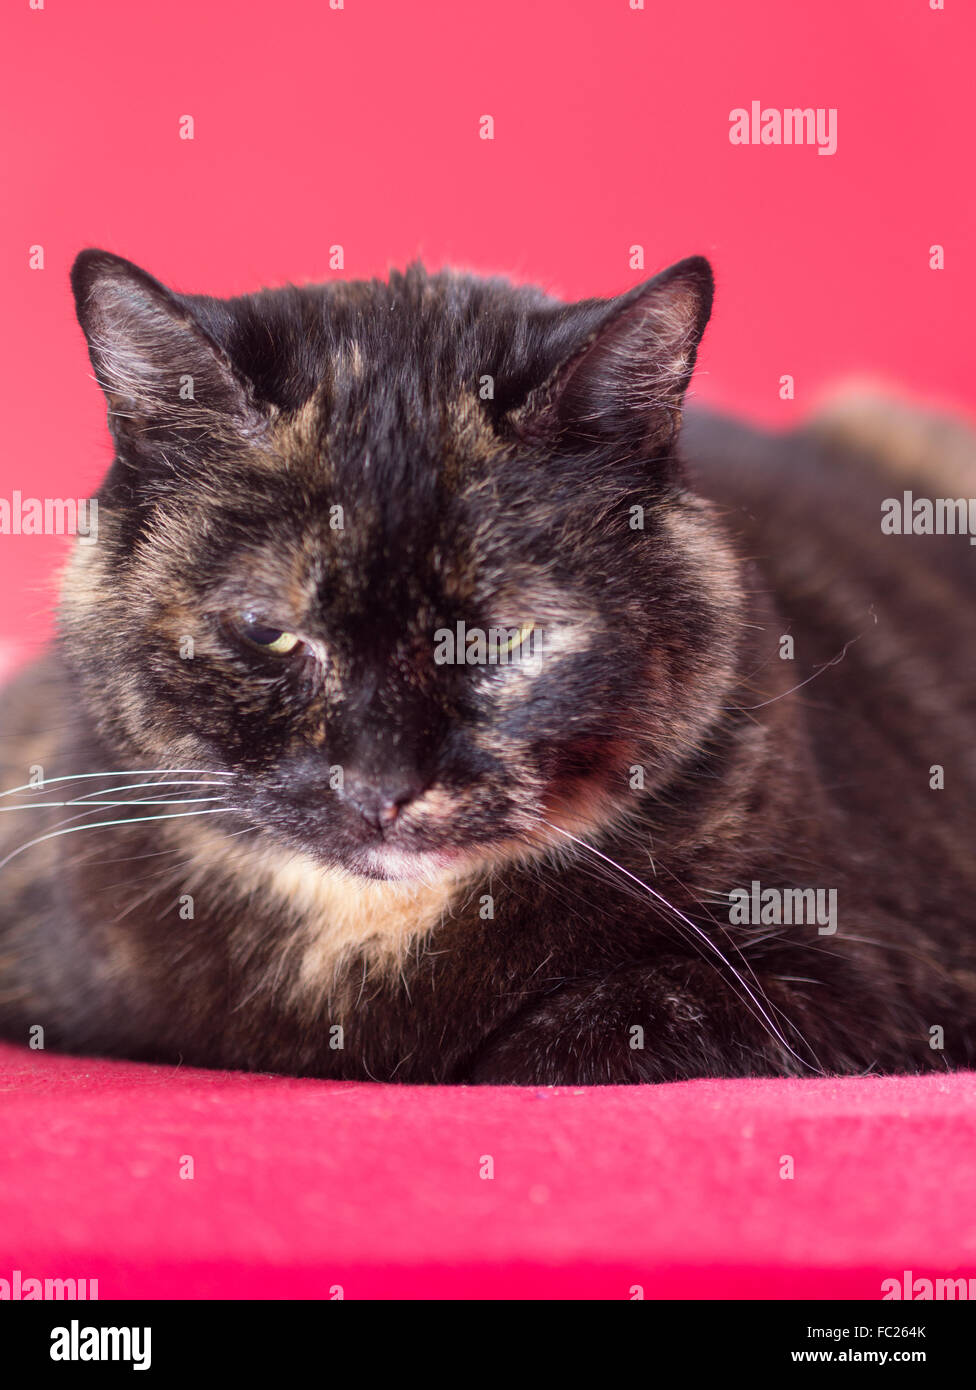 A cat lies relaxed on a blanket Stock Photo